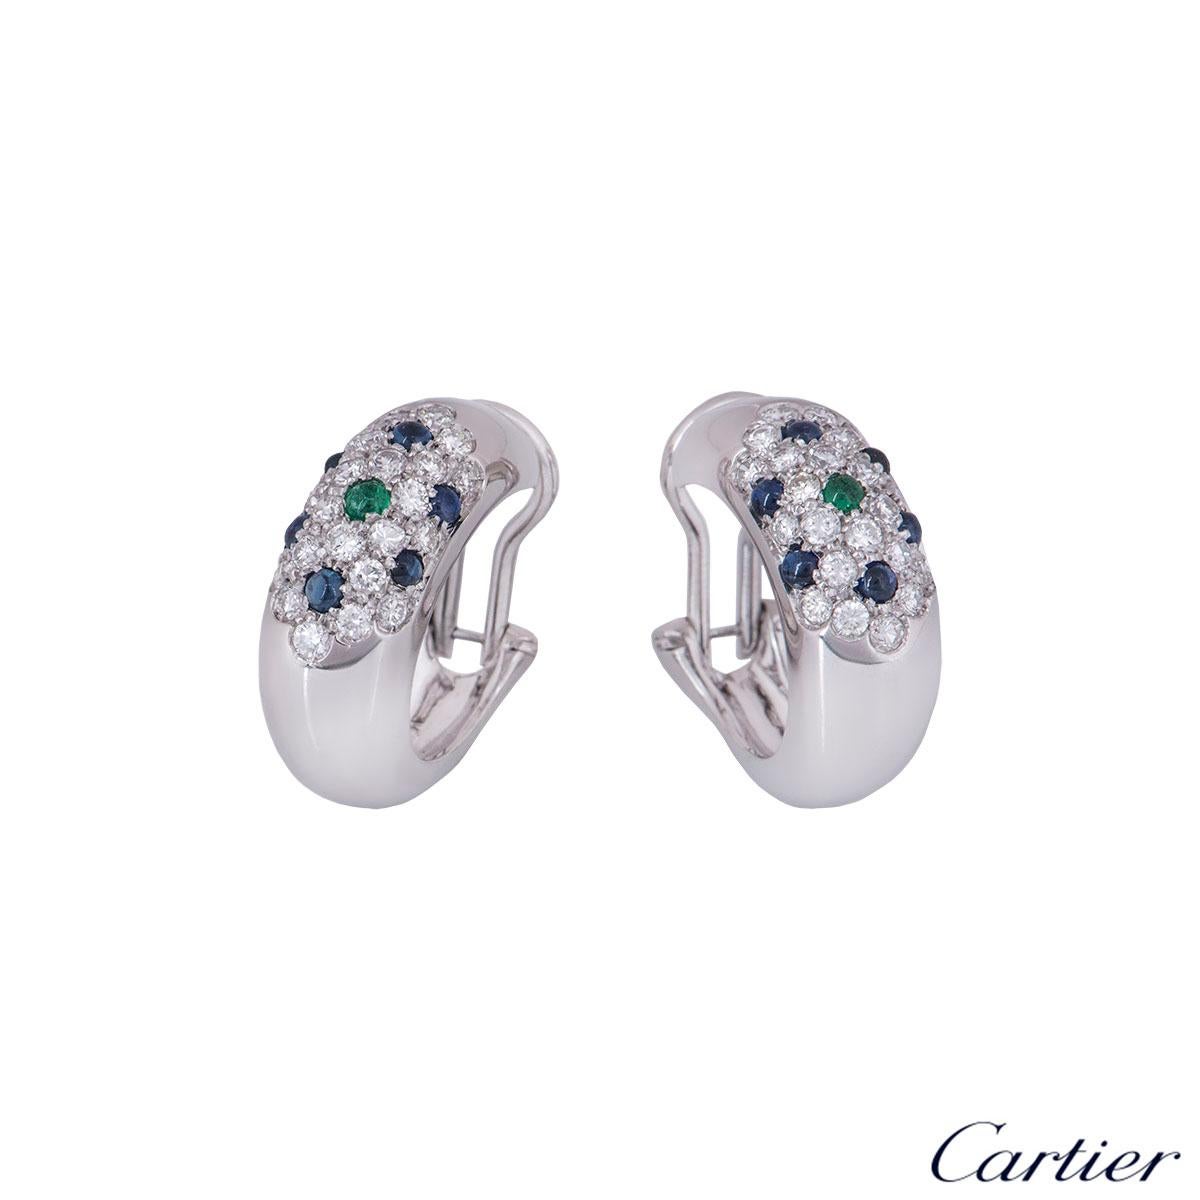 A stunning pair of 18k white gold clip-on earrings by Cartier. Each domed hoop comprises of 22 pave set round brilliant cut diamonds and 6 cabochon cut sapphires, complemented by a single cabochon cut emerald in the centre. The round brilliant cut